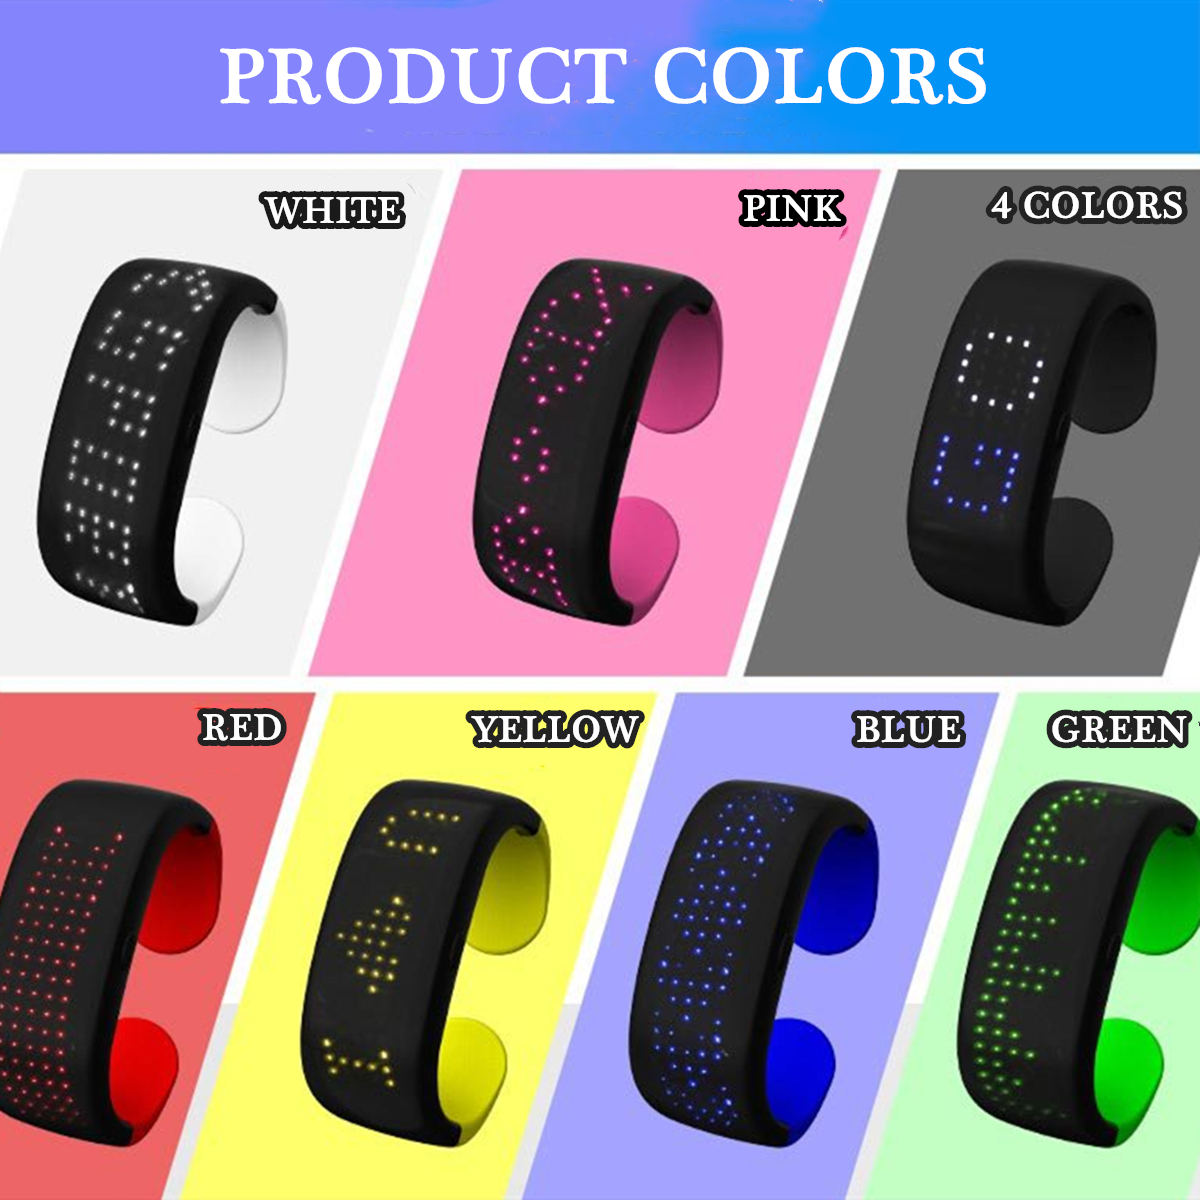 Cheering-Colorful-Display-Dynamic-LED-Luminous-Bracelet-Night-Running-Concert-Party-Props-Bracelet-1652102-2